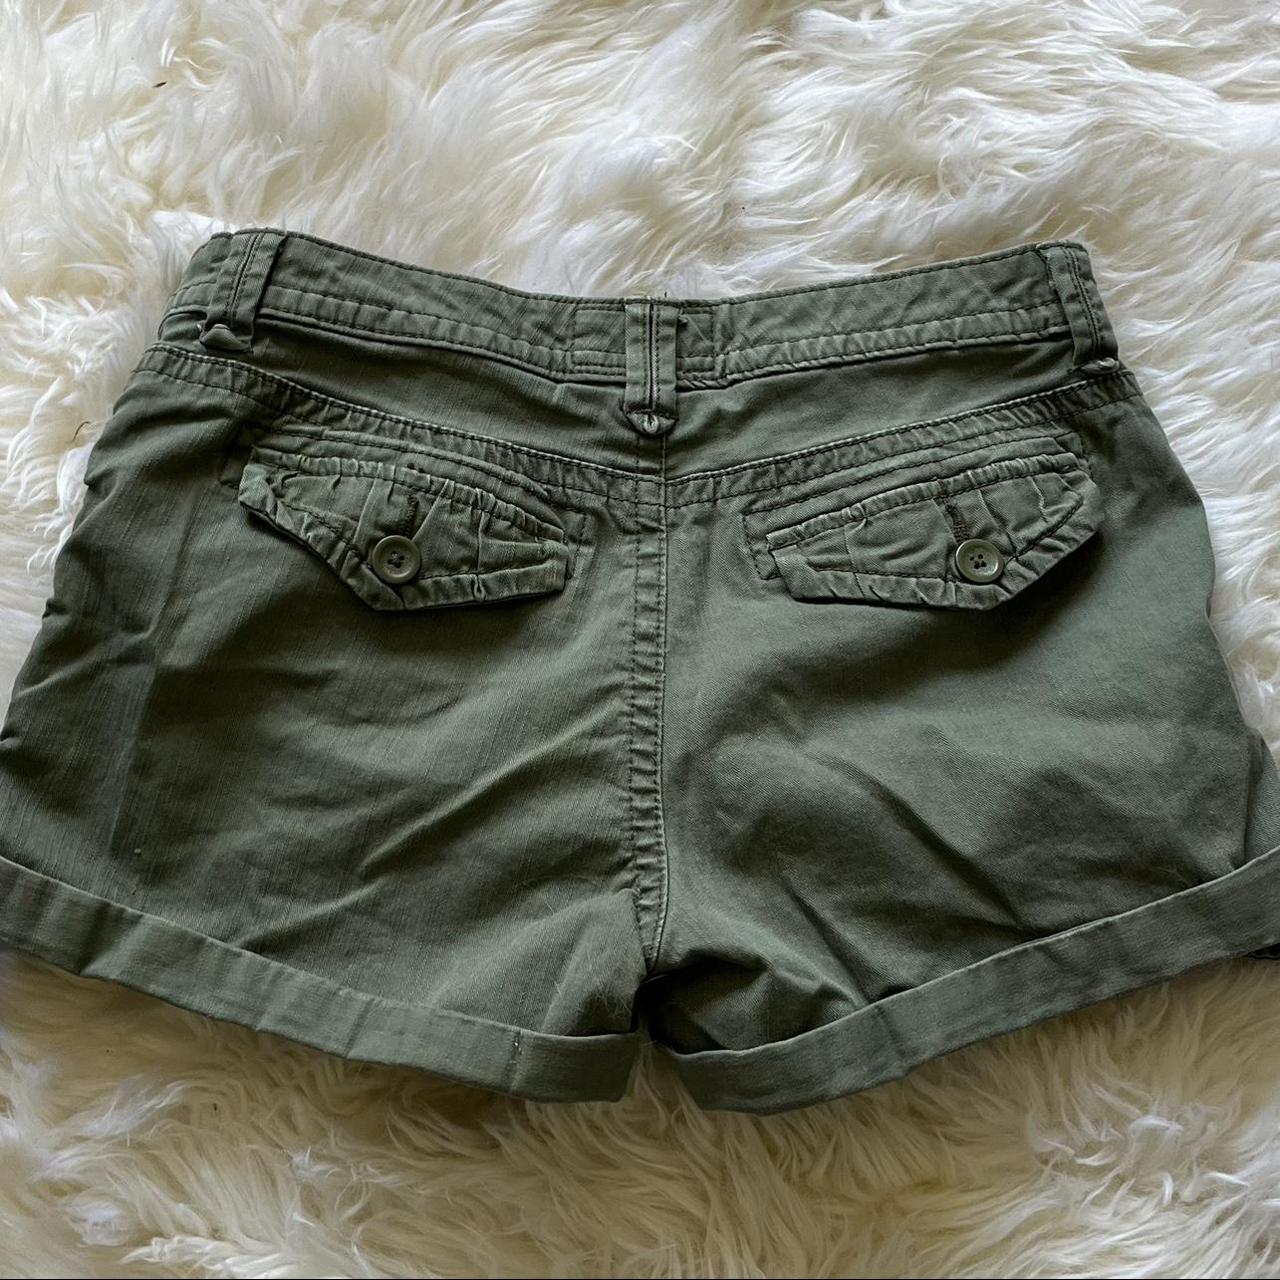 Maurices Women's Green and Khaki Shorts | Depop